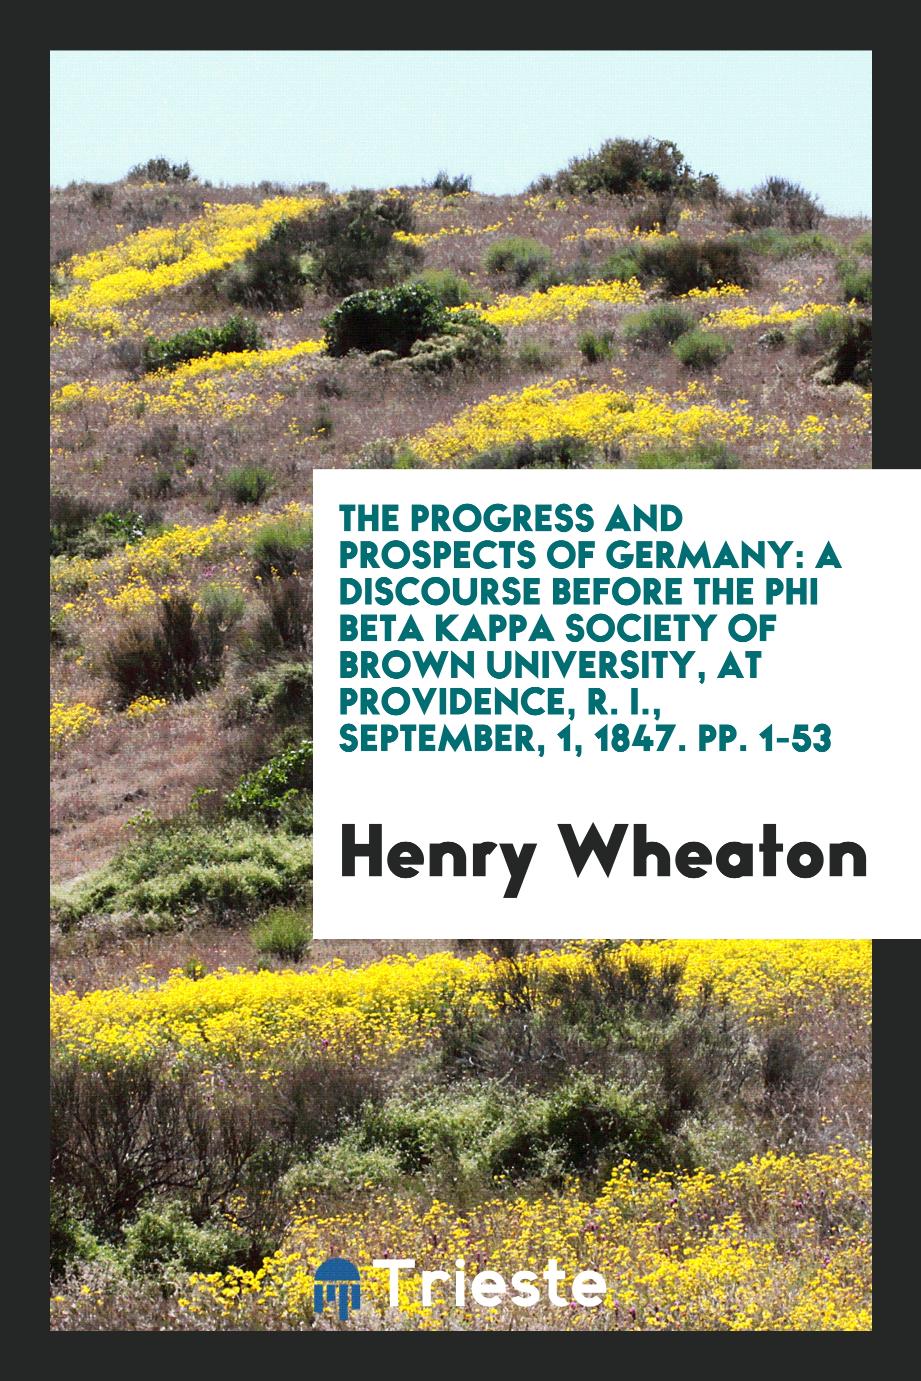 The Progress and Prospects of Germany: A Discourse Before the Phi Beta Kappa Society of Brown University, at providence, R. I., September, 1, 1847. pp. 1-53